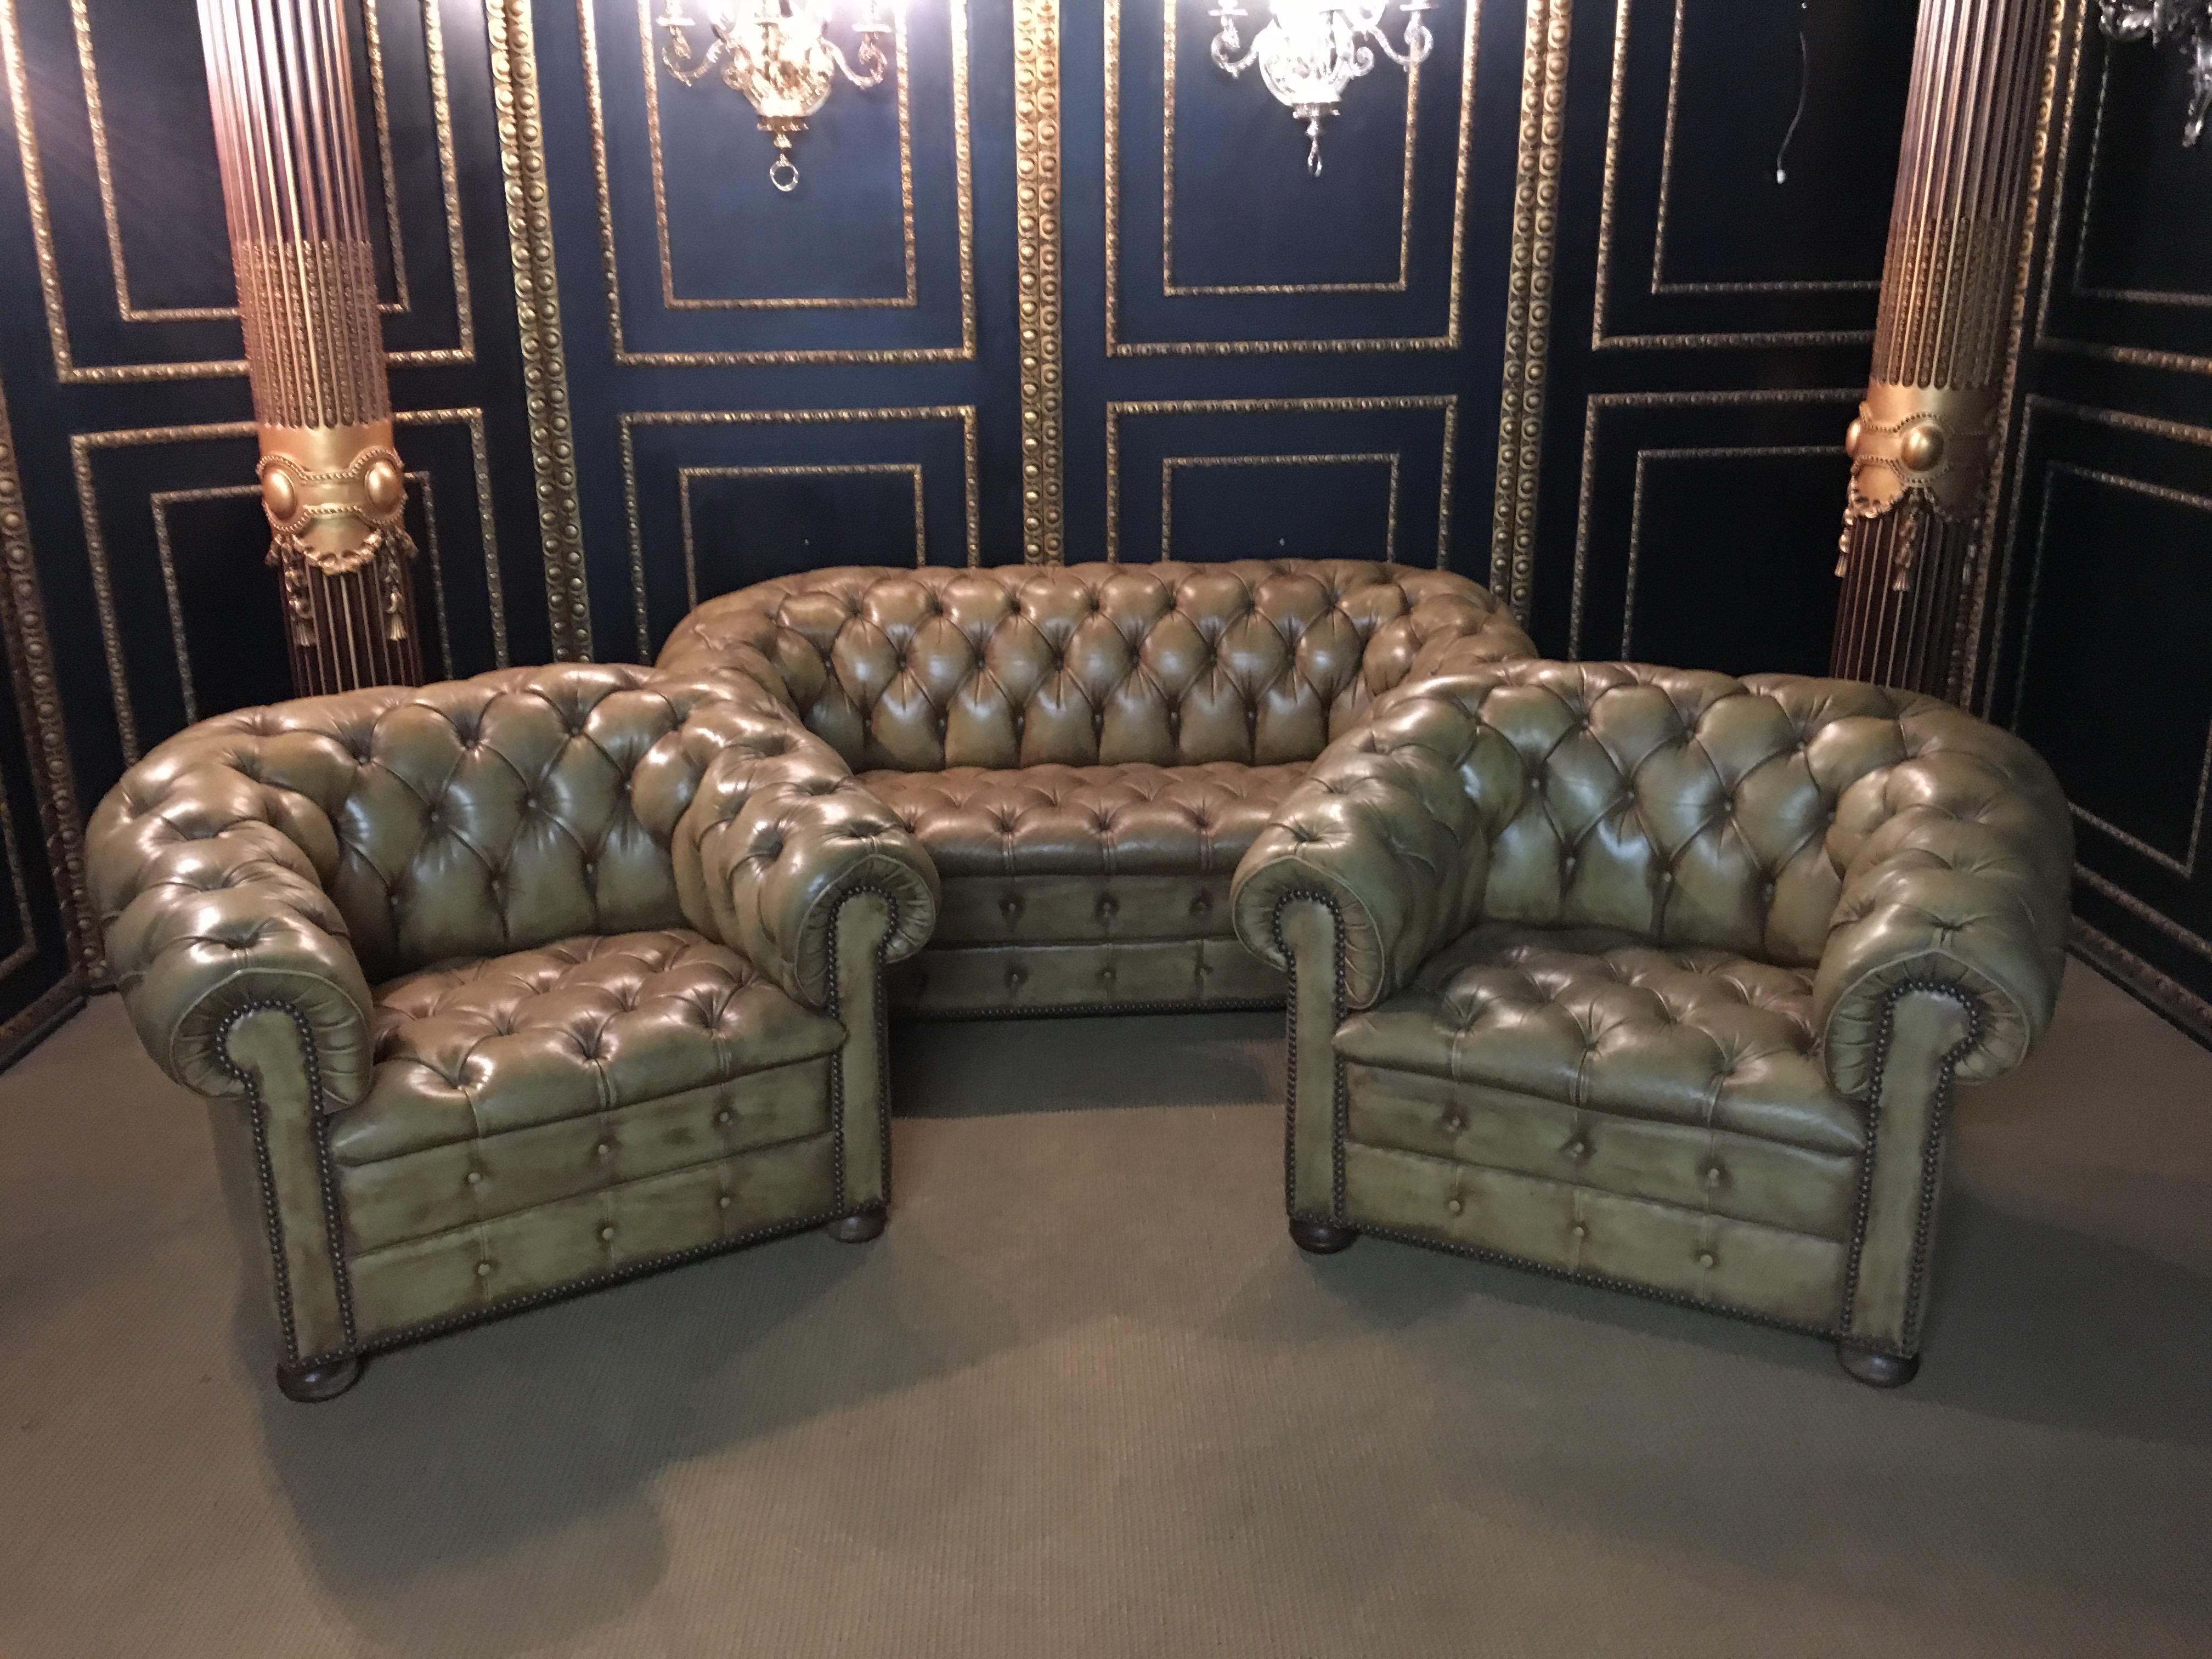 The Chesterfield set is covered with genuine, finest leather. The leather is of the highest quality, very easy to clean and durable in use. At the same time, it is very gentle and smooth. A rarity to buy as a garnish and in this absolute top